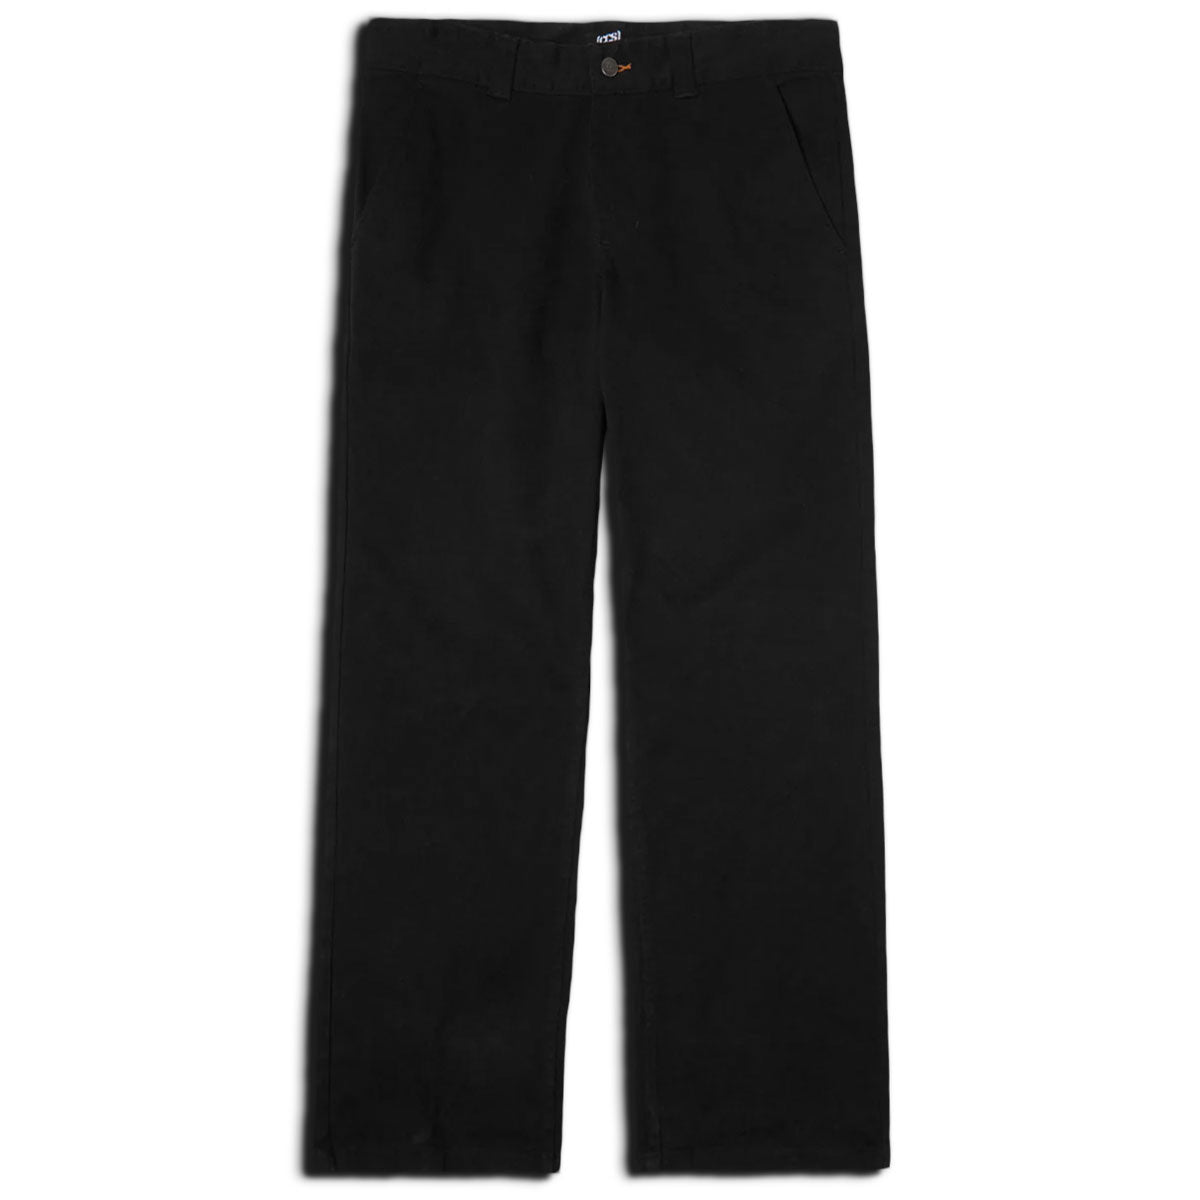 CCS Standard Plus Relaxed Chino Pants - Black image 5